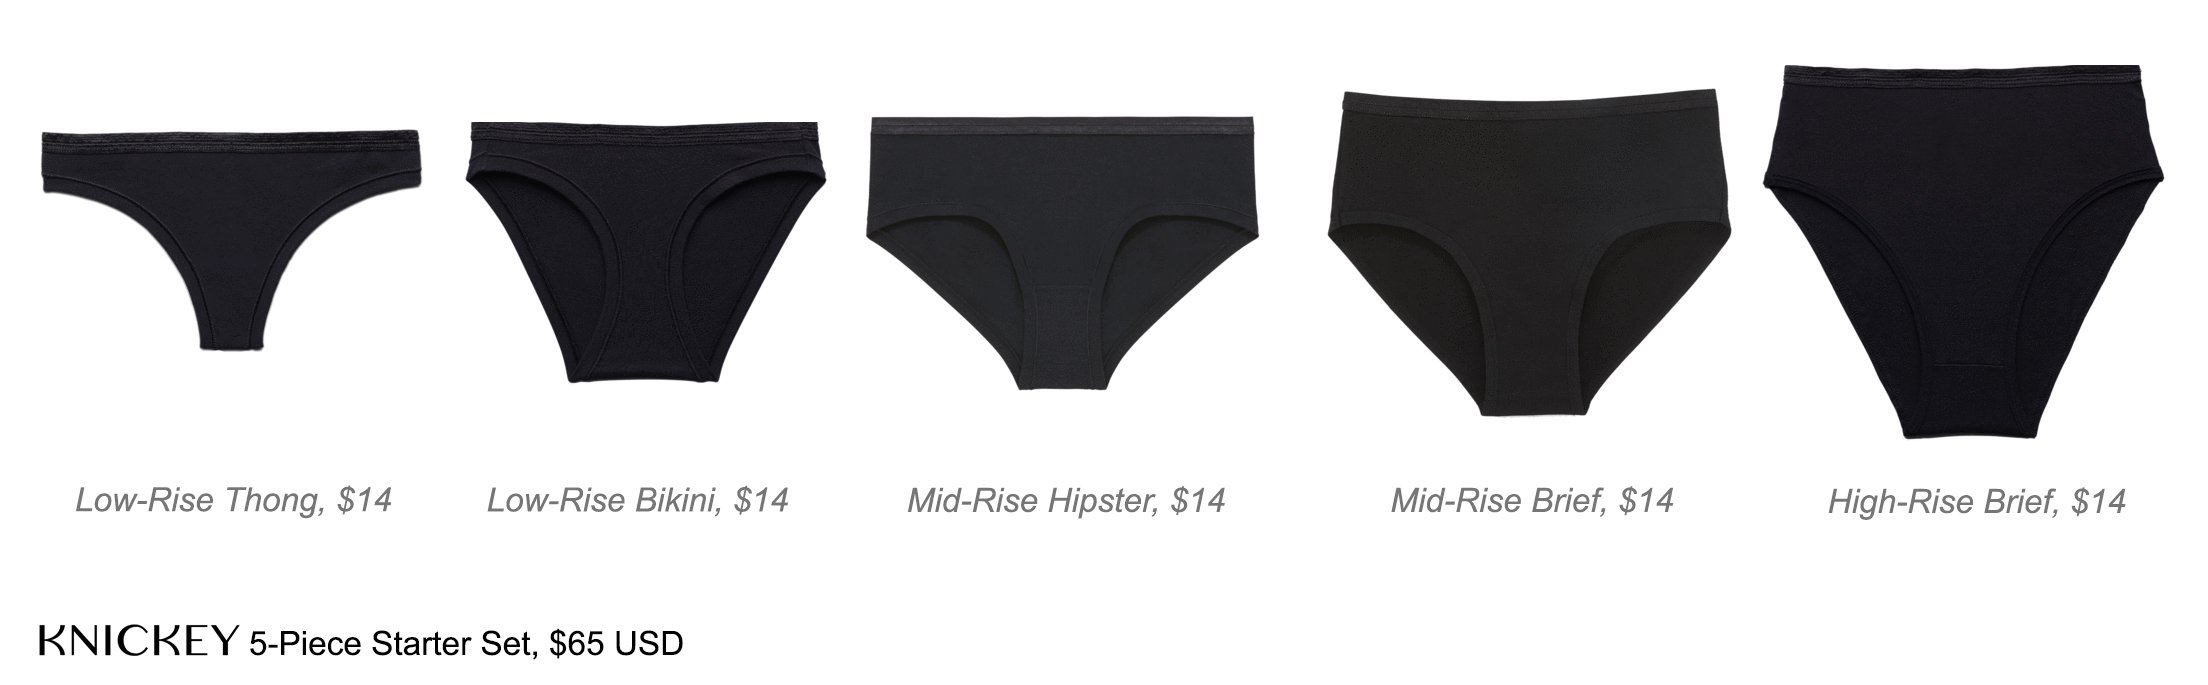 Knickey Recycling Program and Underwear Review